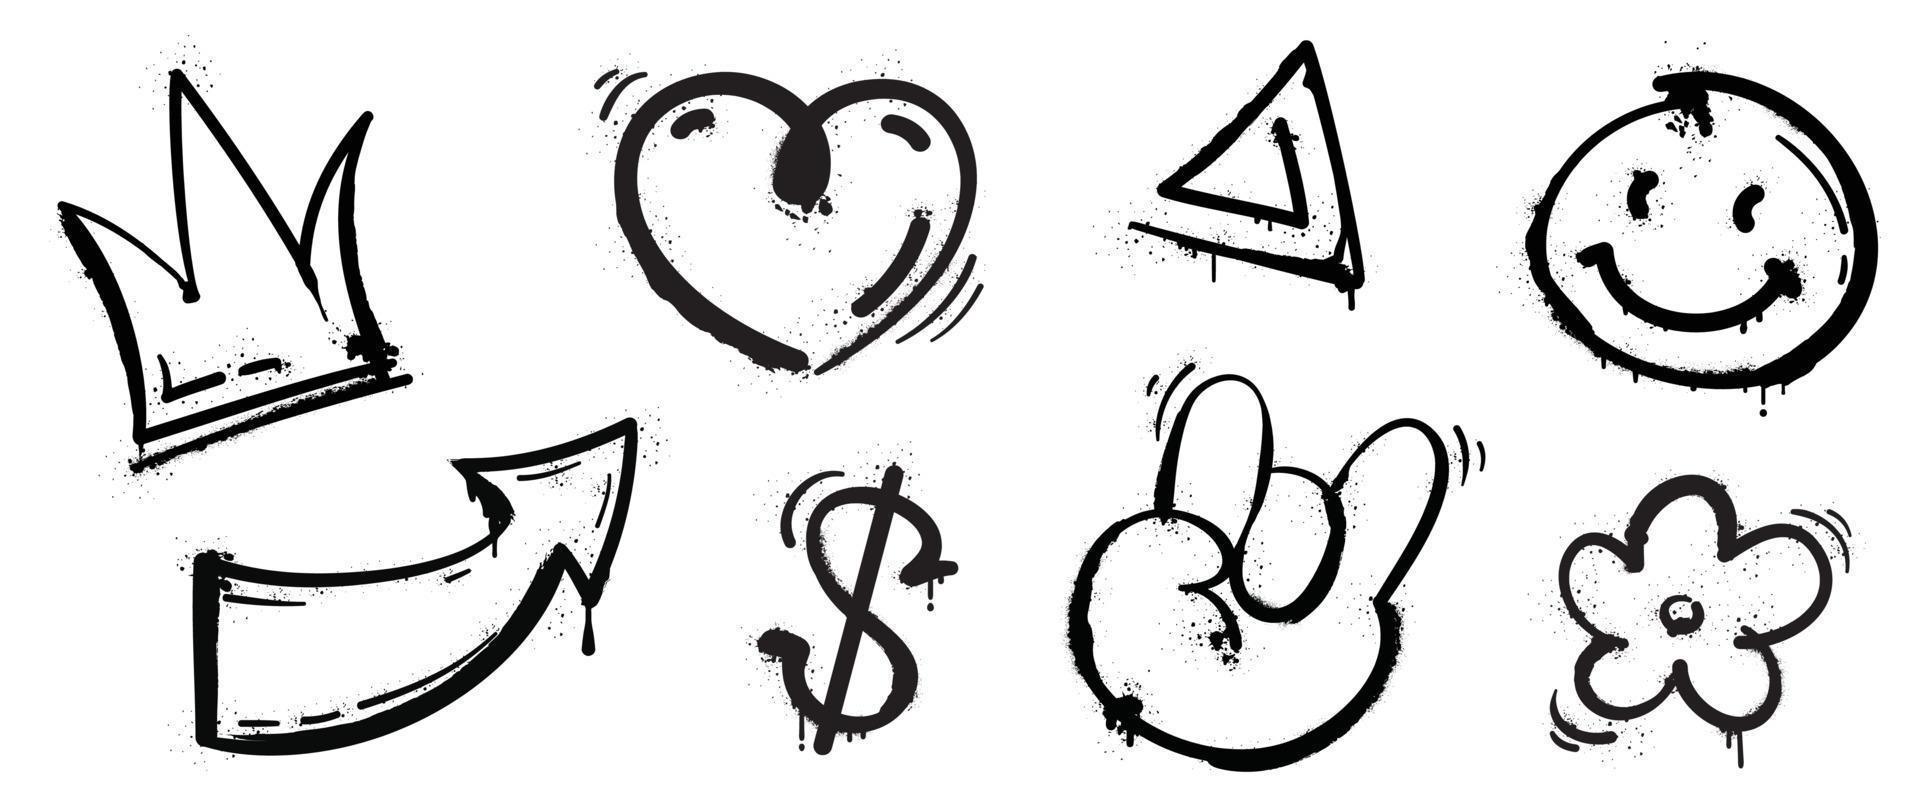 Set of graffiti spray pattern vector illustration. Collection of spray texture crown, heart, arrow, currency, flower, hand gesture. Elements on white background for banner, decoration, street art.